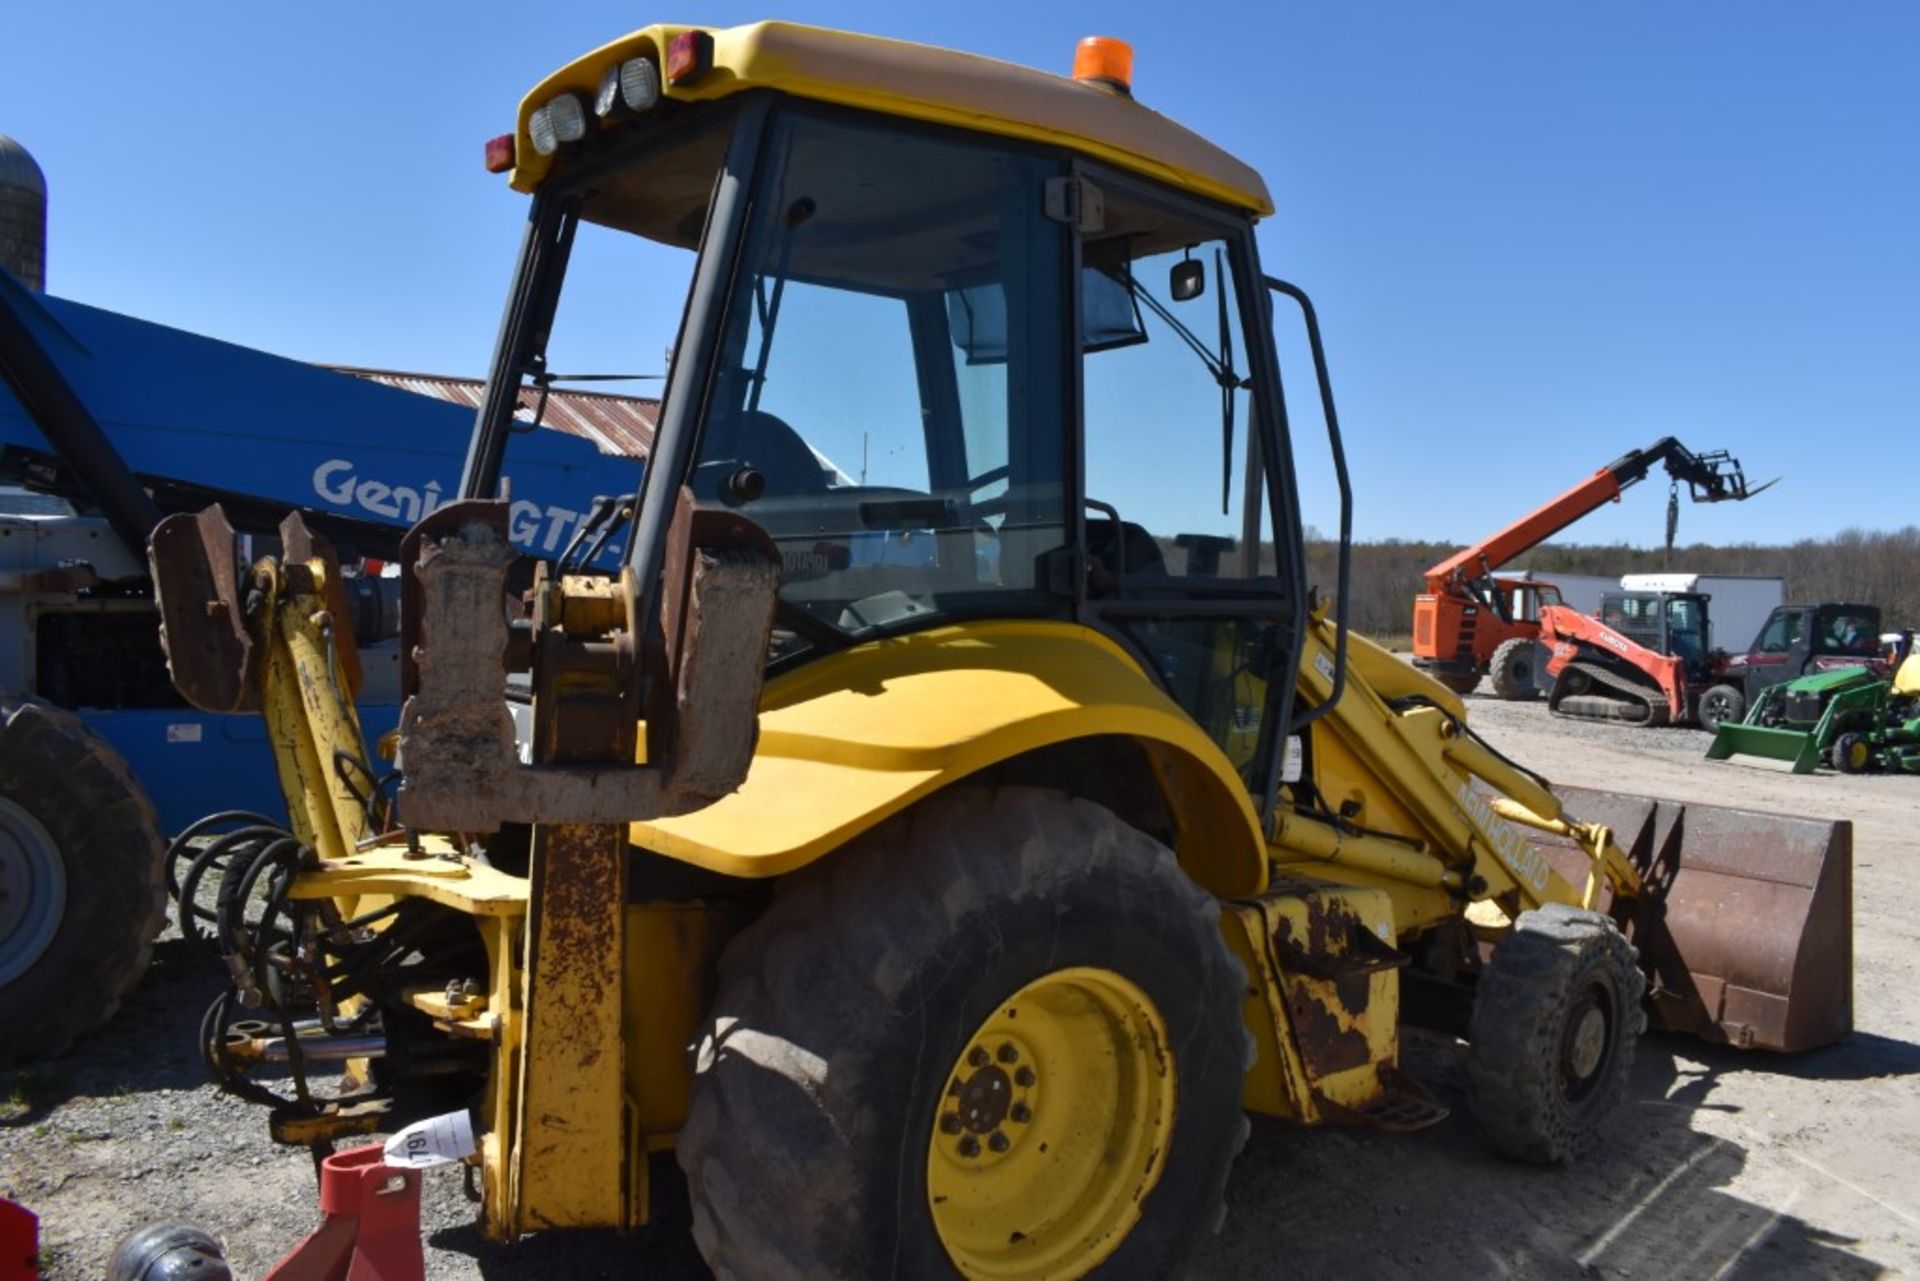 New Holland LB75B Backhoe 8052 Hours, Runs and Operates, 88" Bucket, 4WD, Outriggers, No Backhoe, - Image 4 of 24